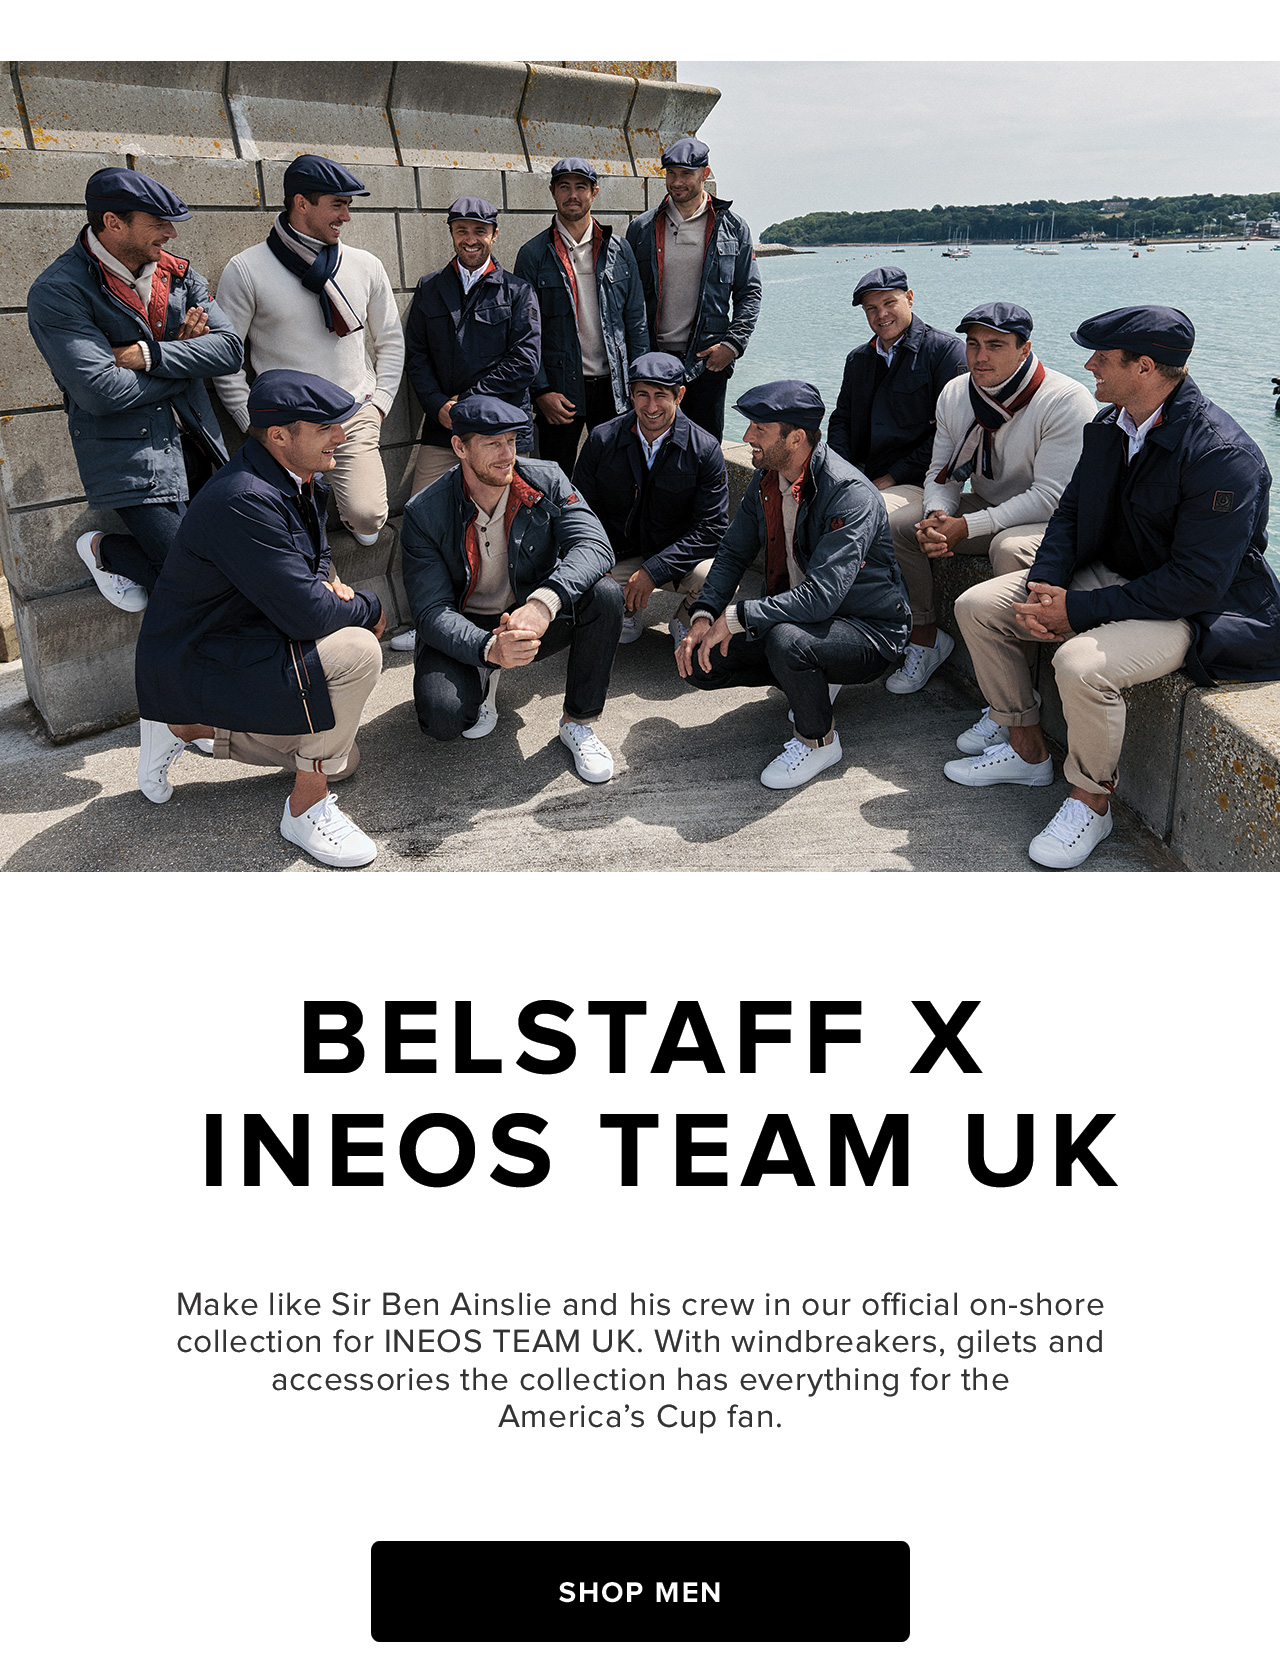 Make like Sir Ben Ainslie and his crew in our official on-shore collection for INEOS TEAM UK. With windbreakers, gilets and accessories the collection has everything for the America's Cup fan.